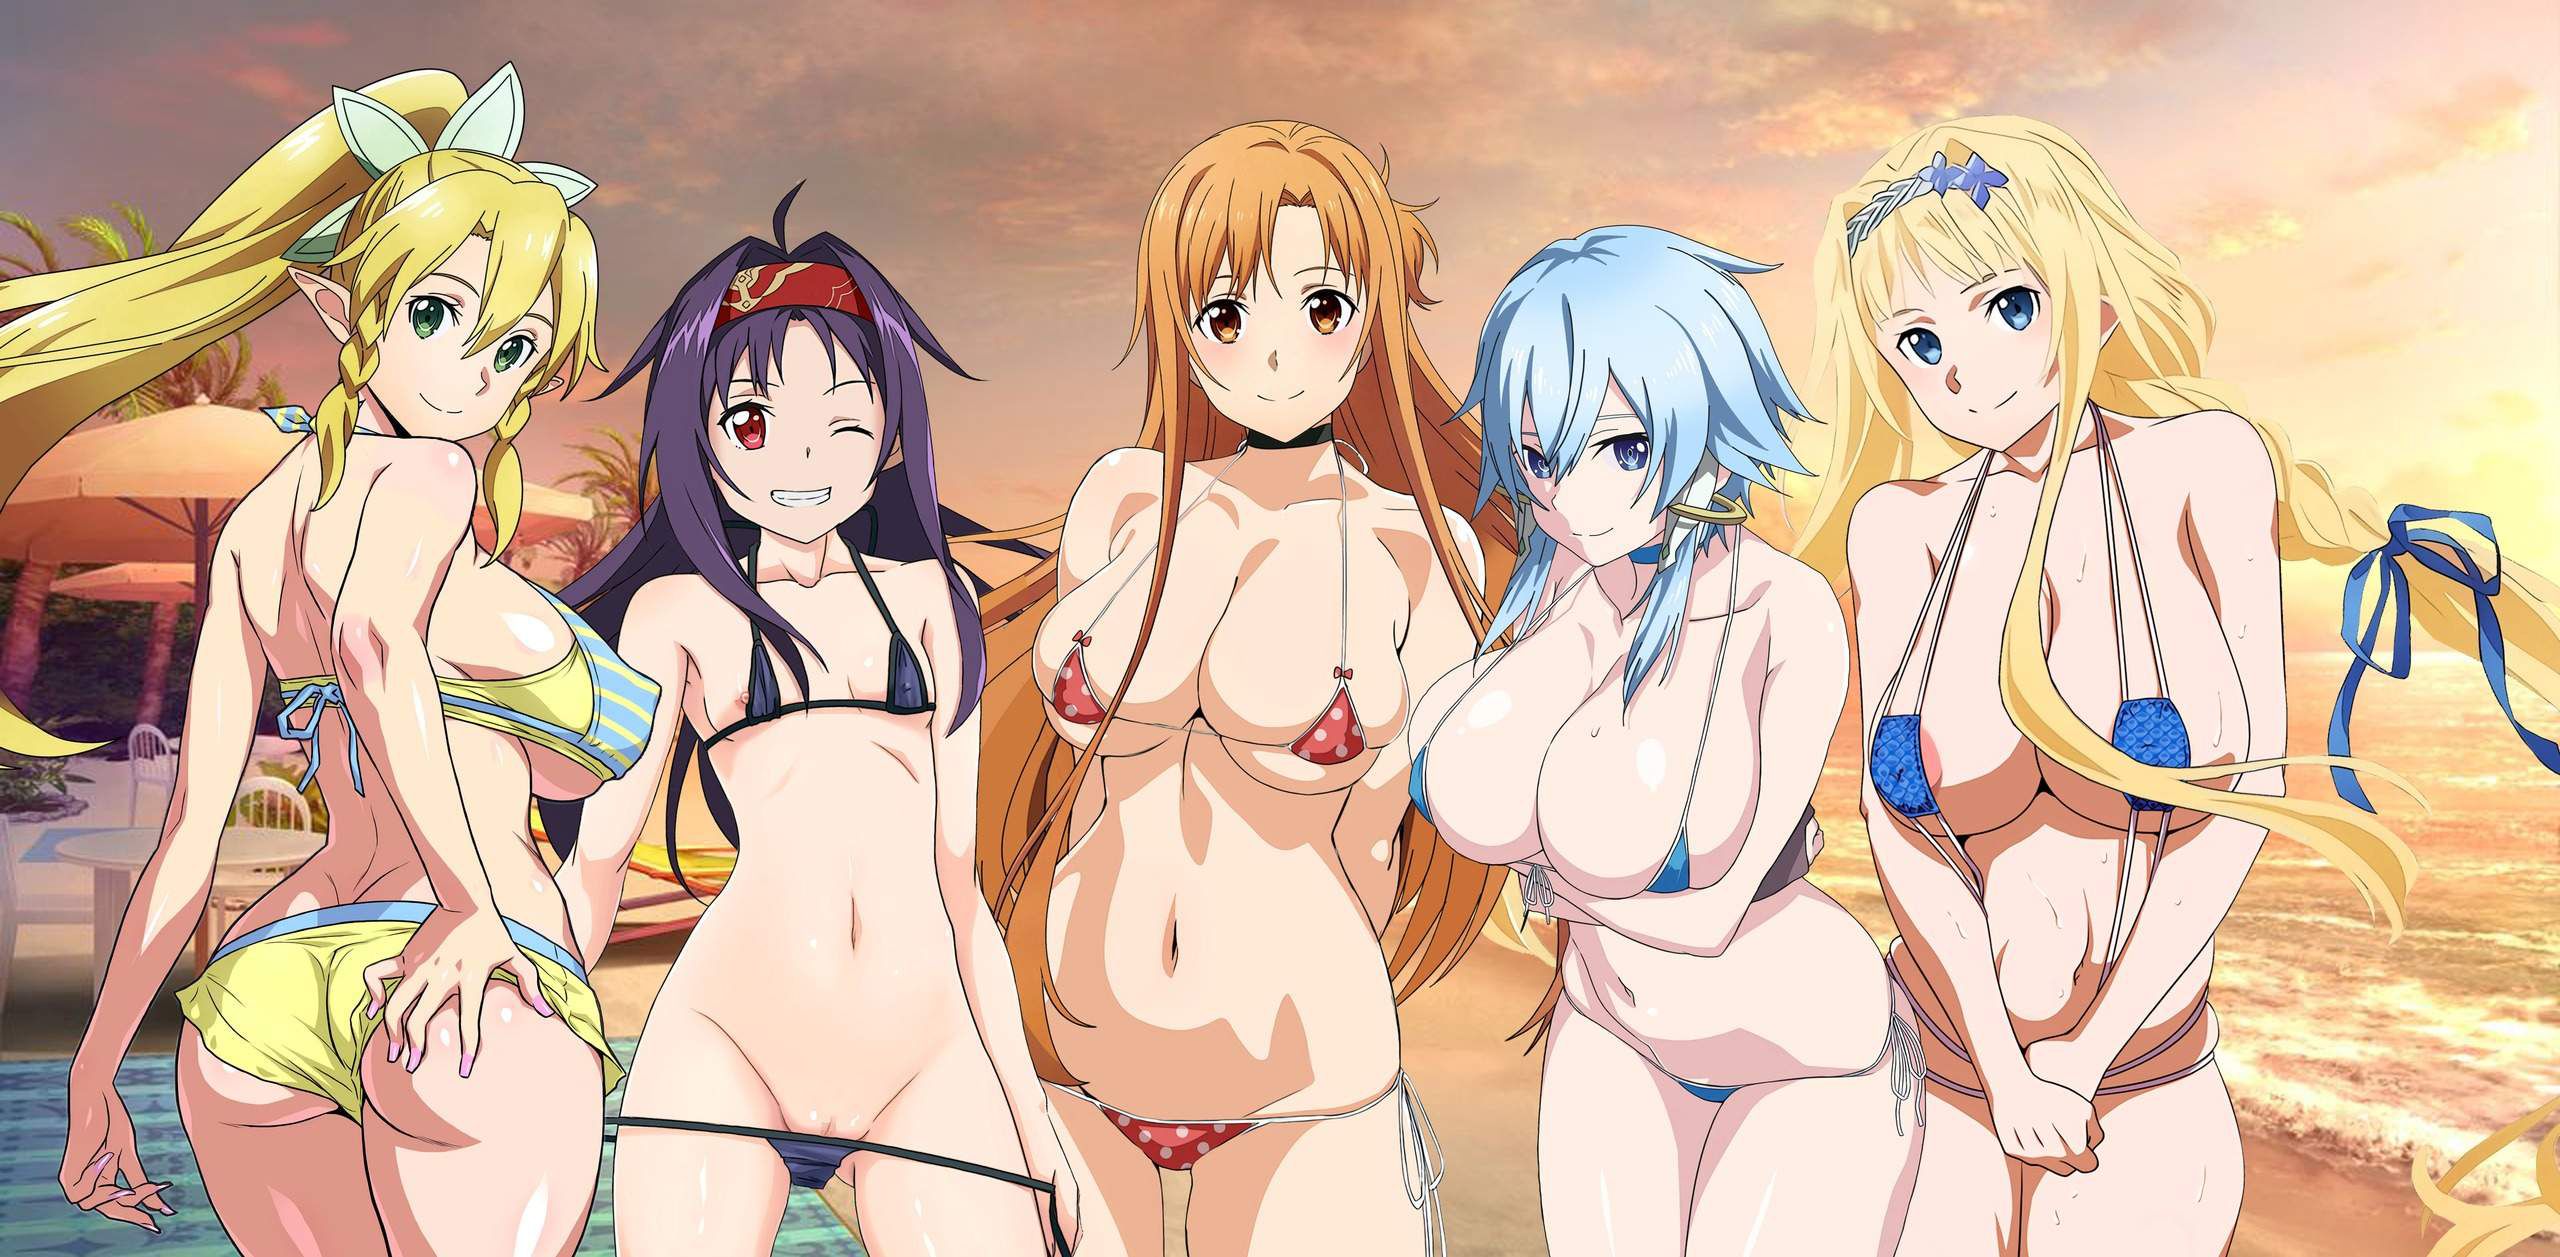 [Sword Art Online (SAO)] Erotic images such as Asuna-chan 75th 14